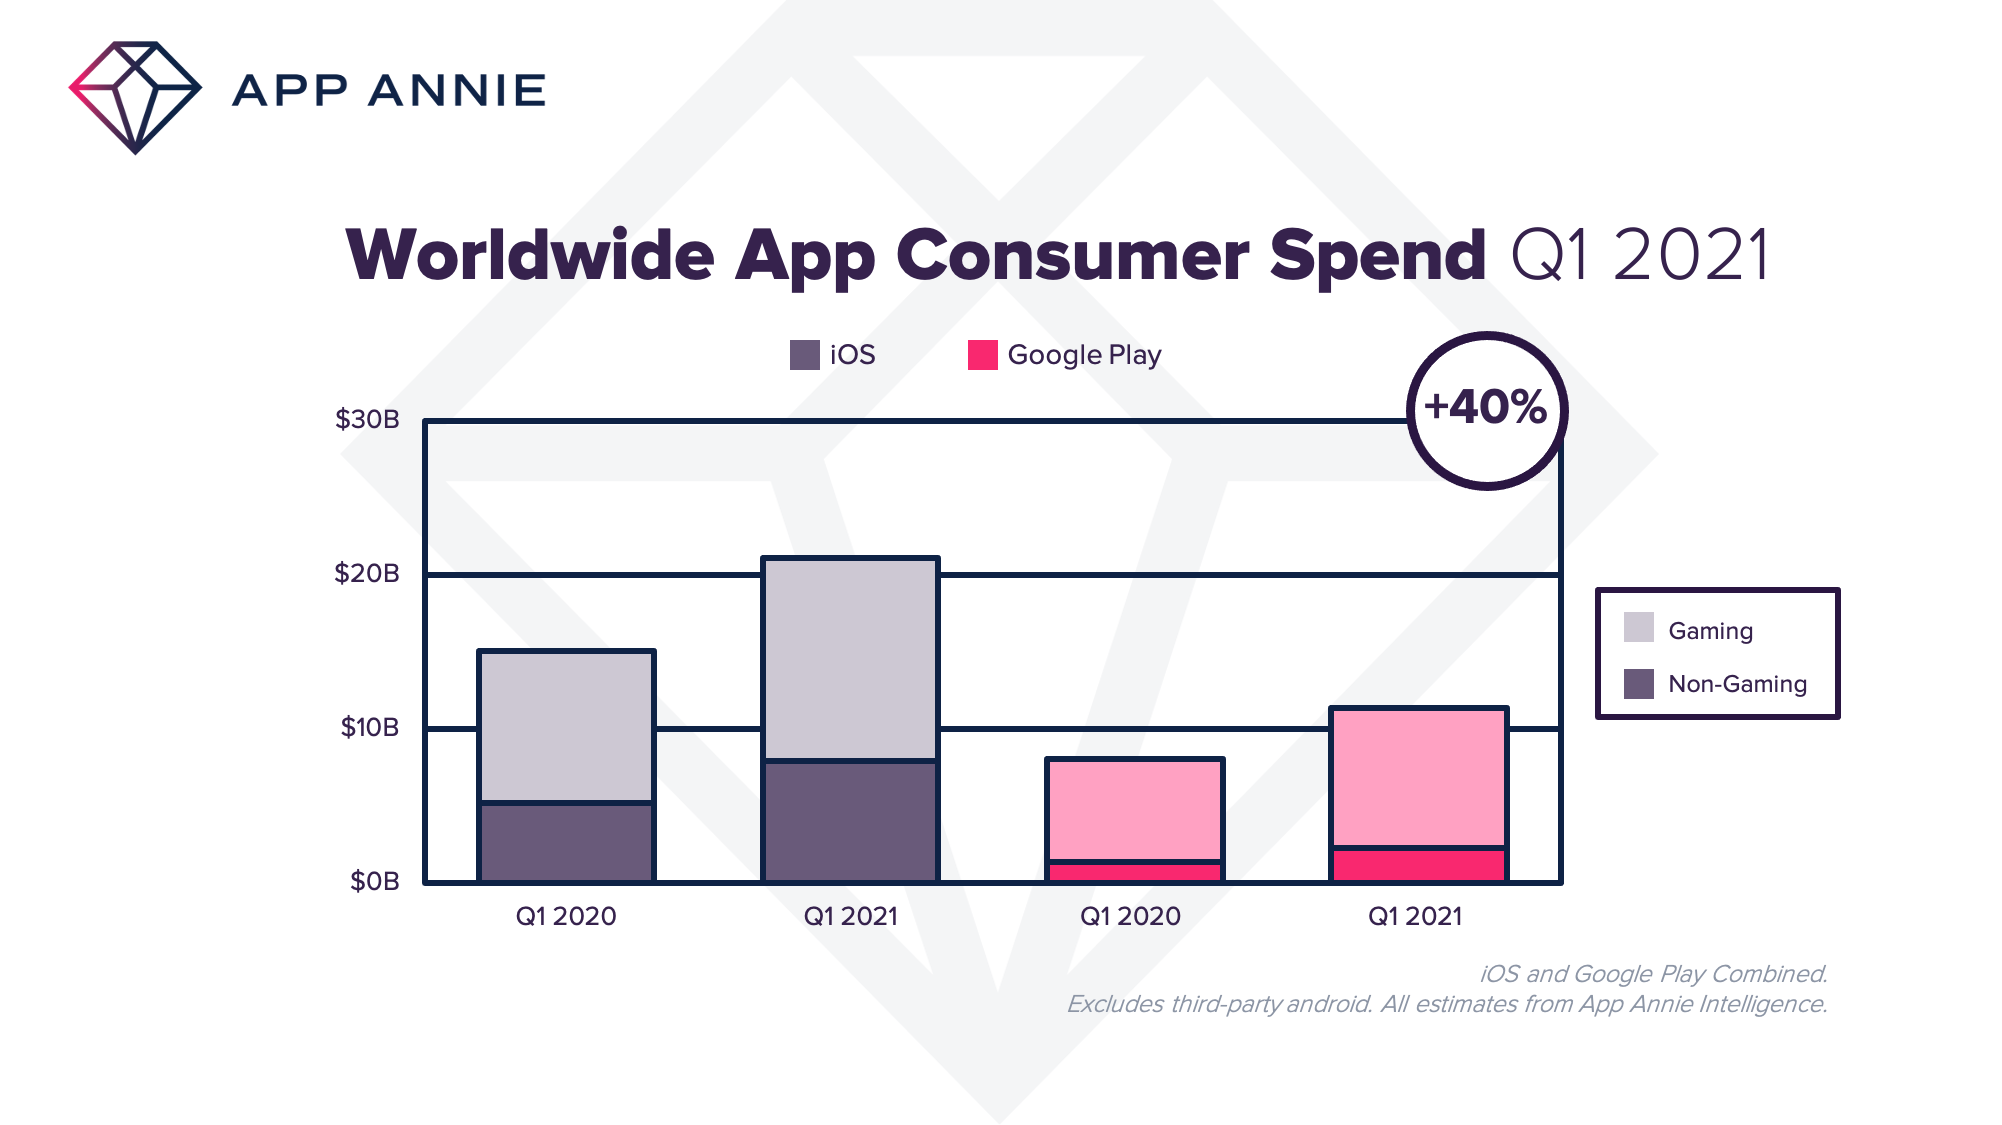 Image for Consumers spend $32b on apps in Q1 2021 - App Annie